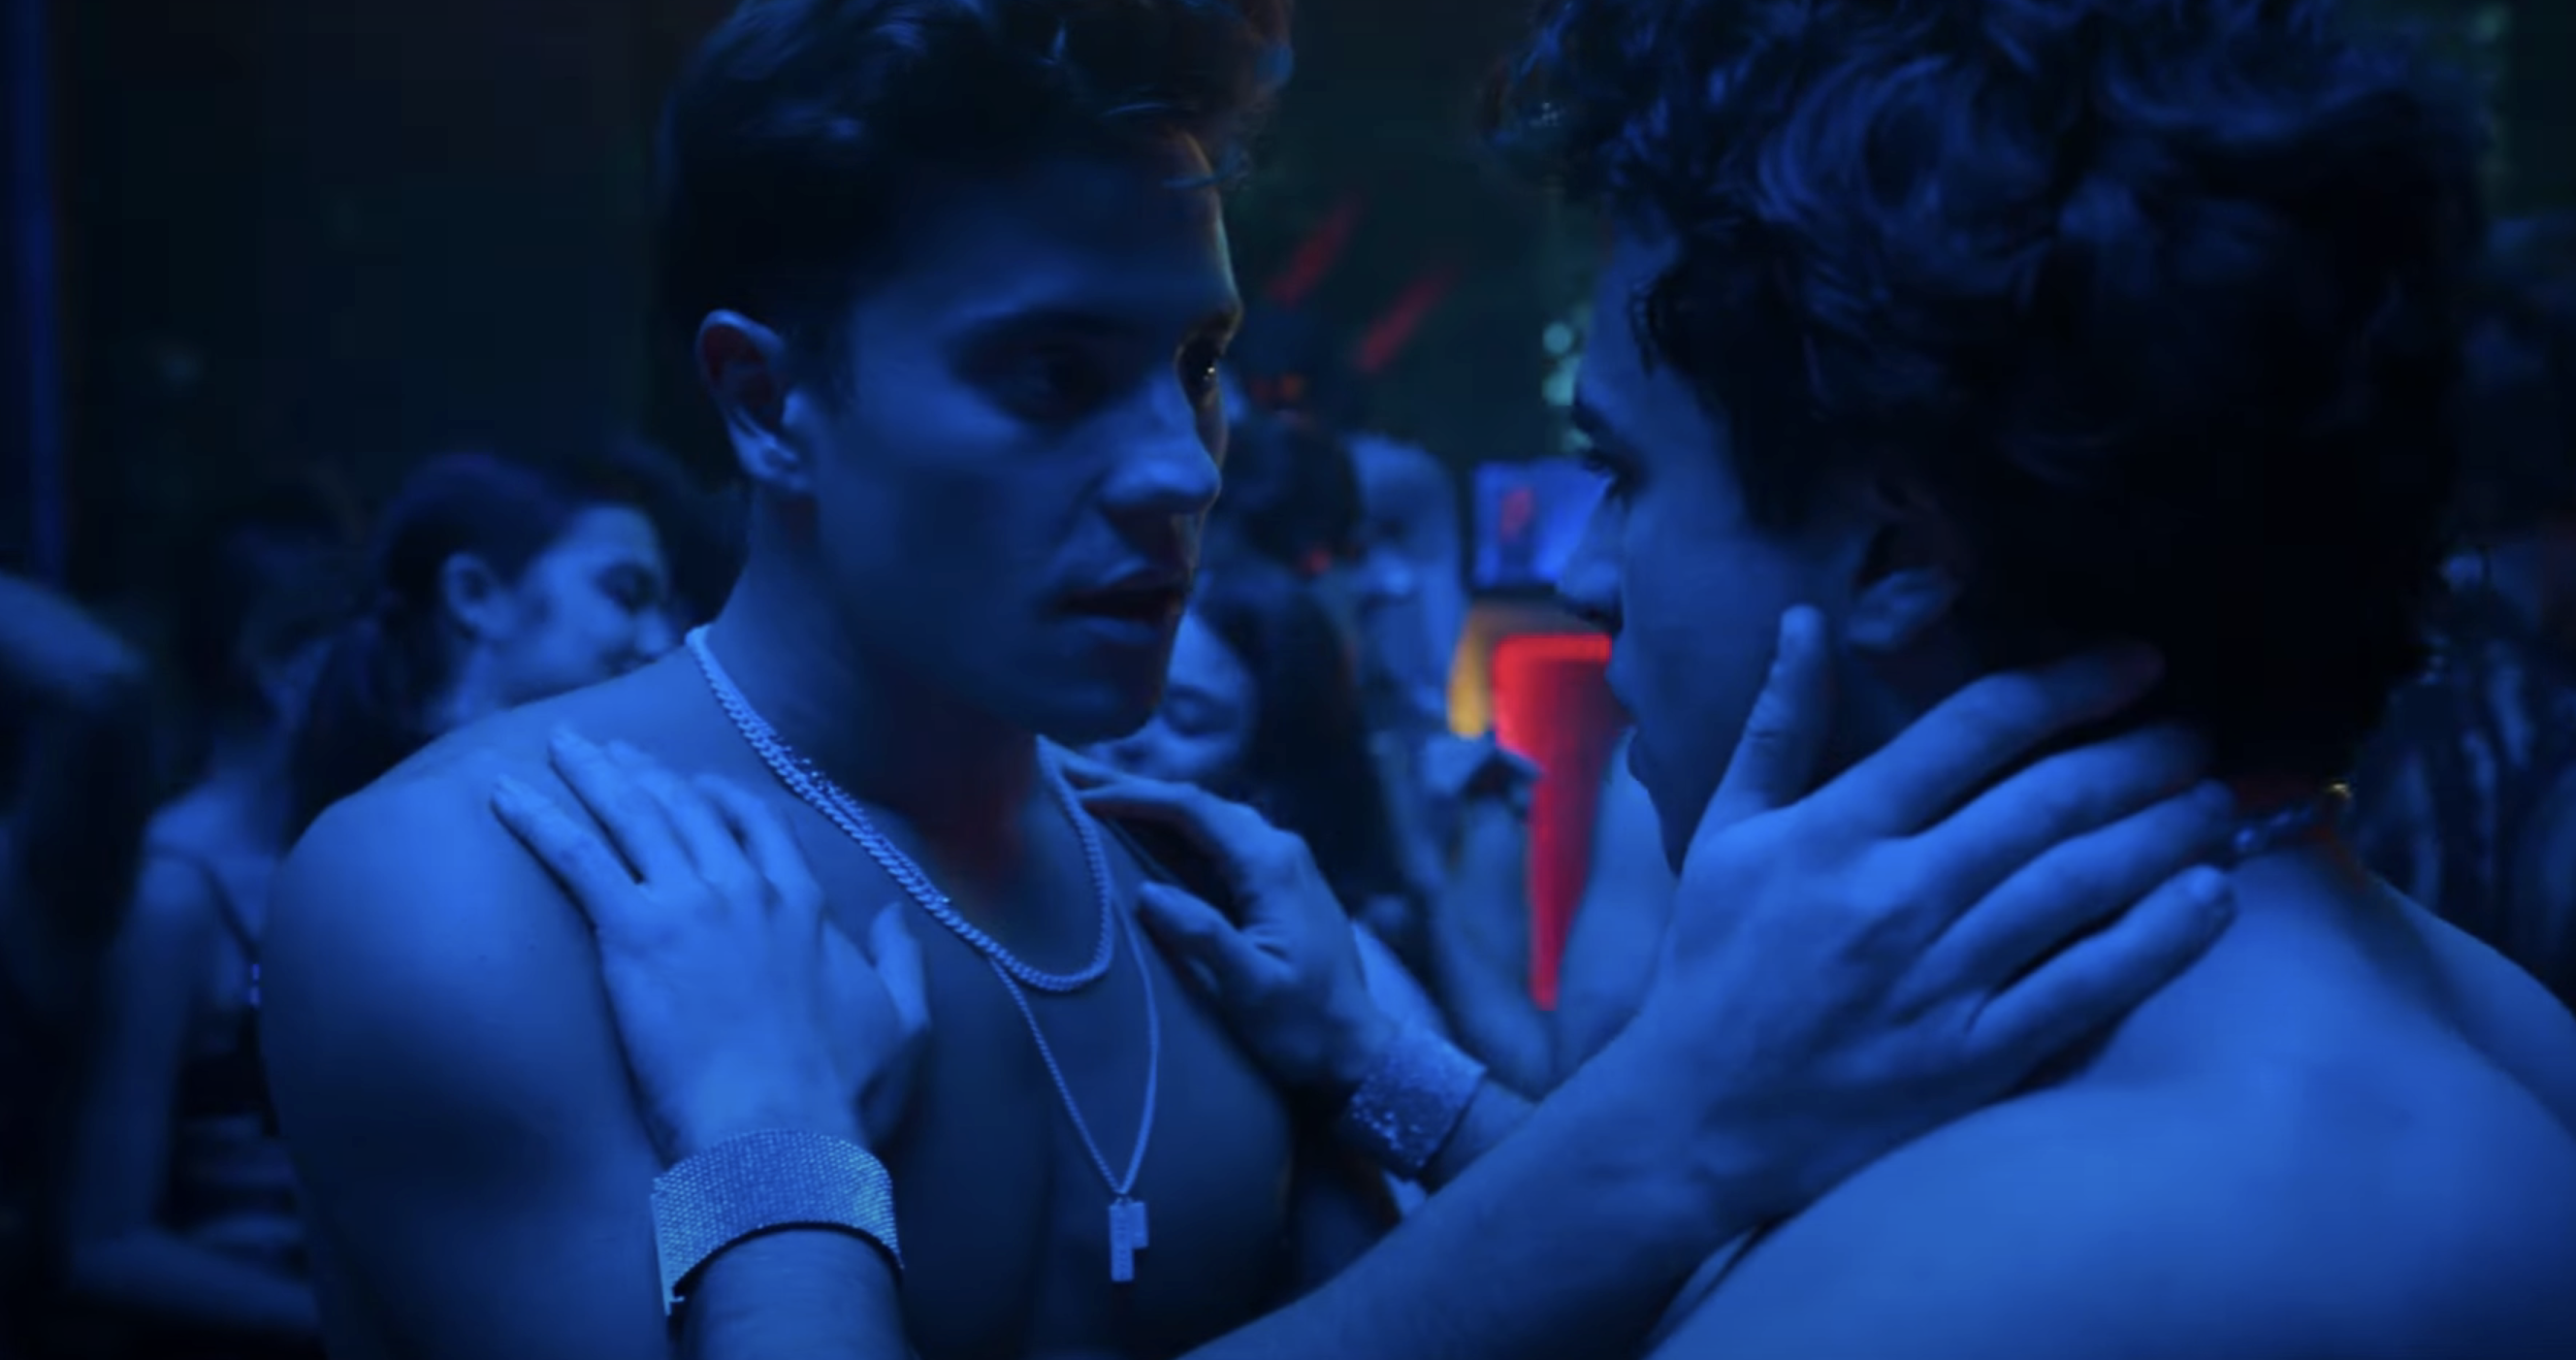 Two people are close and face each other intimately in a dimly lit, crowded setting, suggestive of a nightclub scene